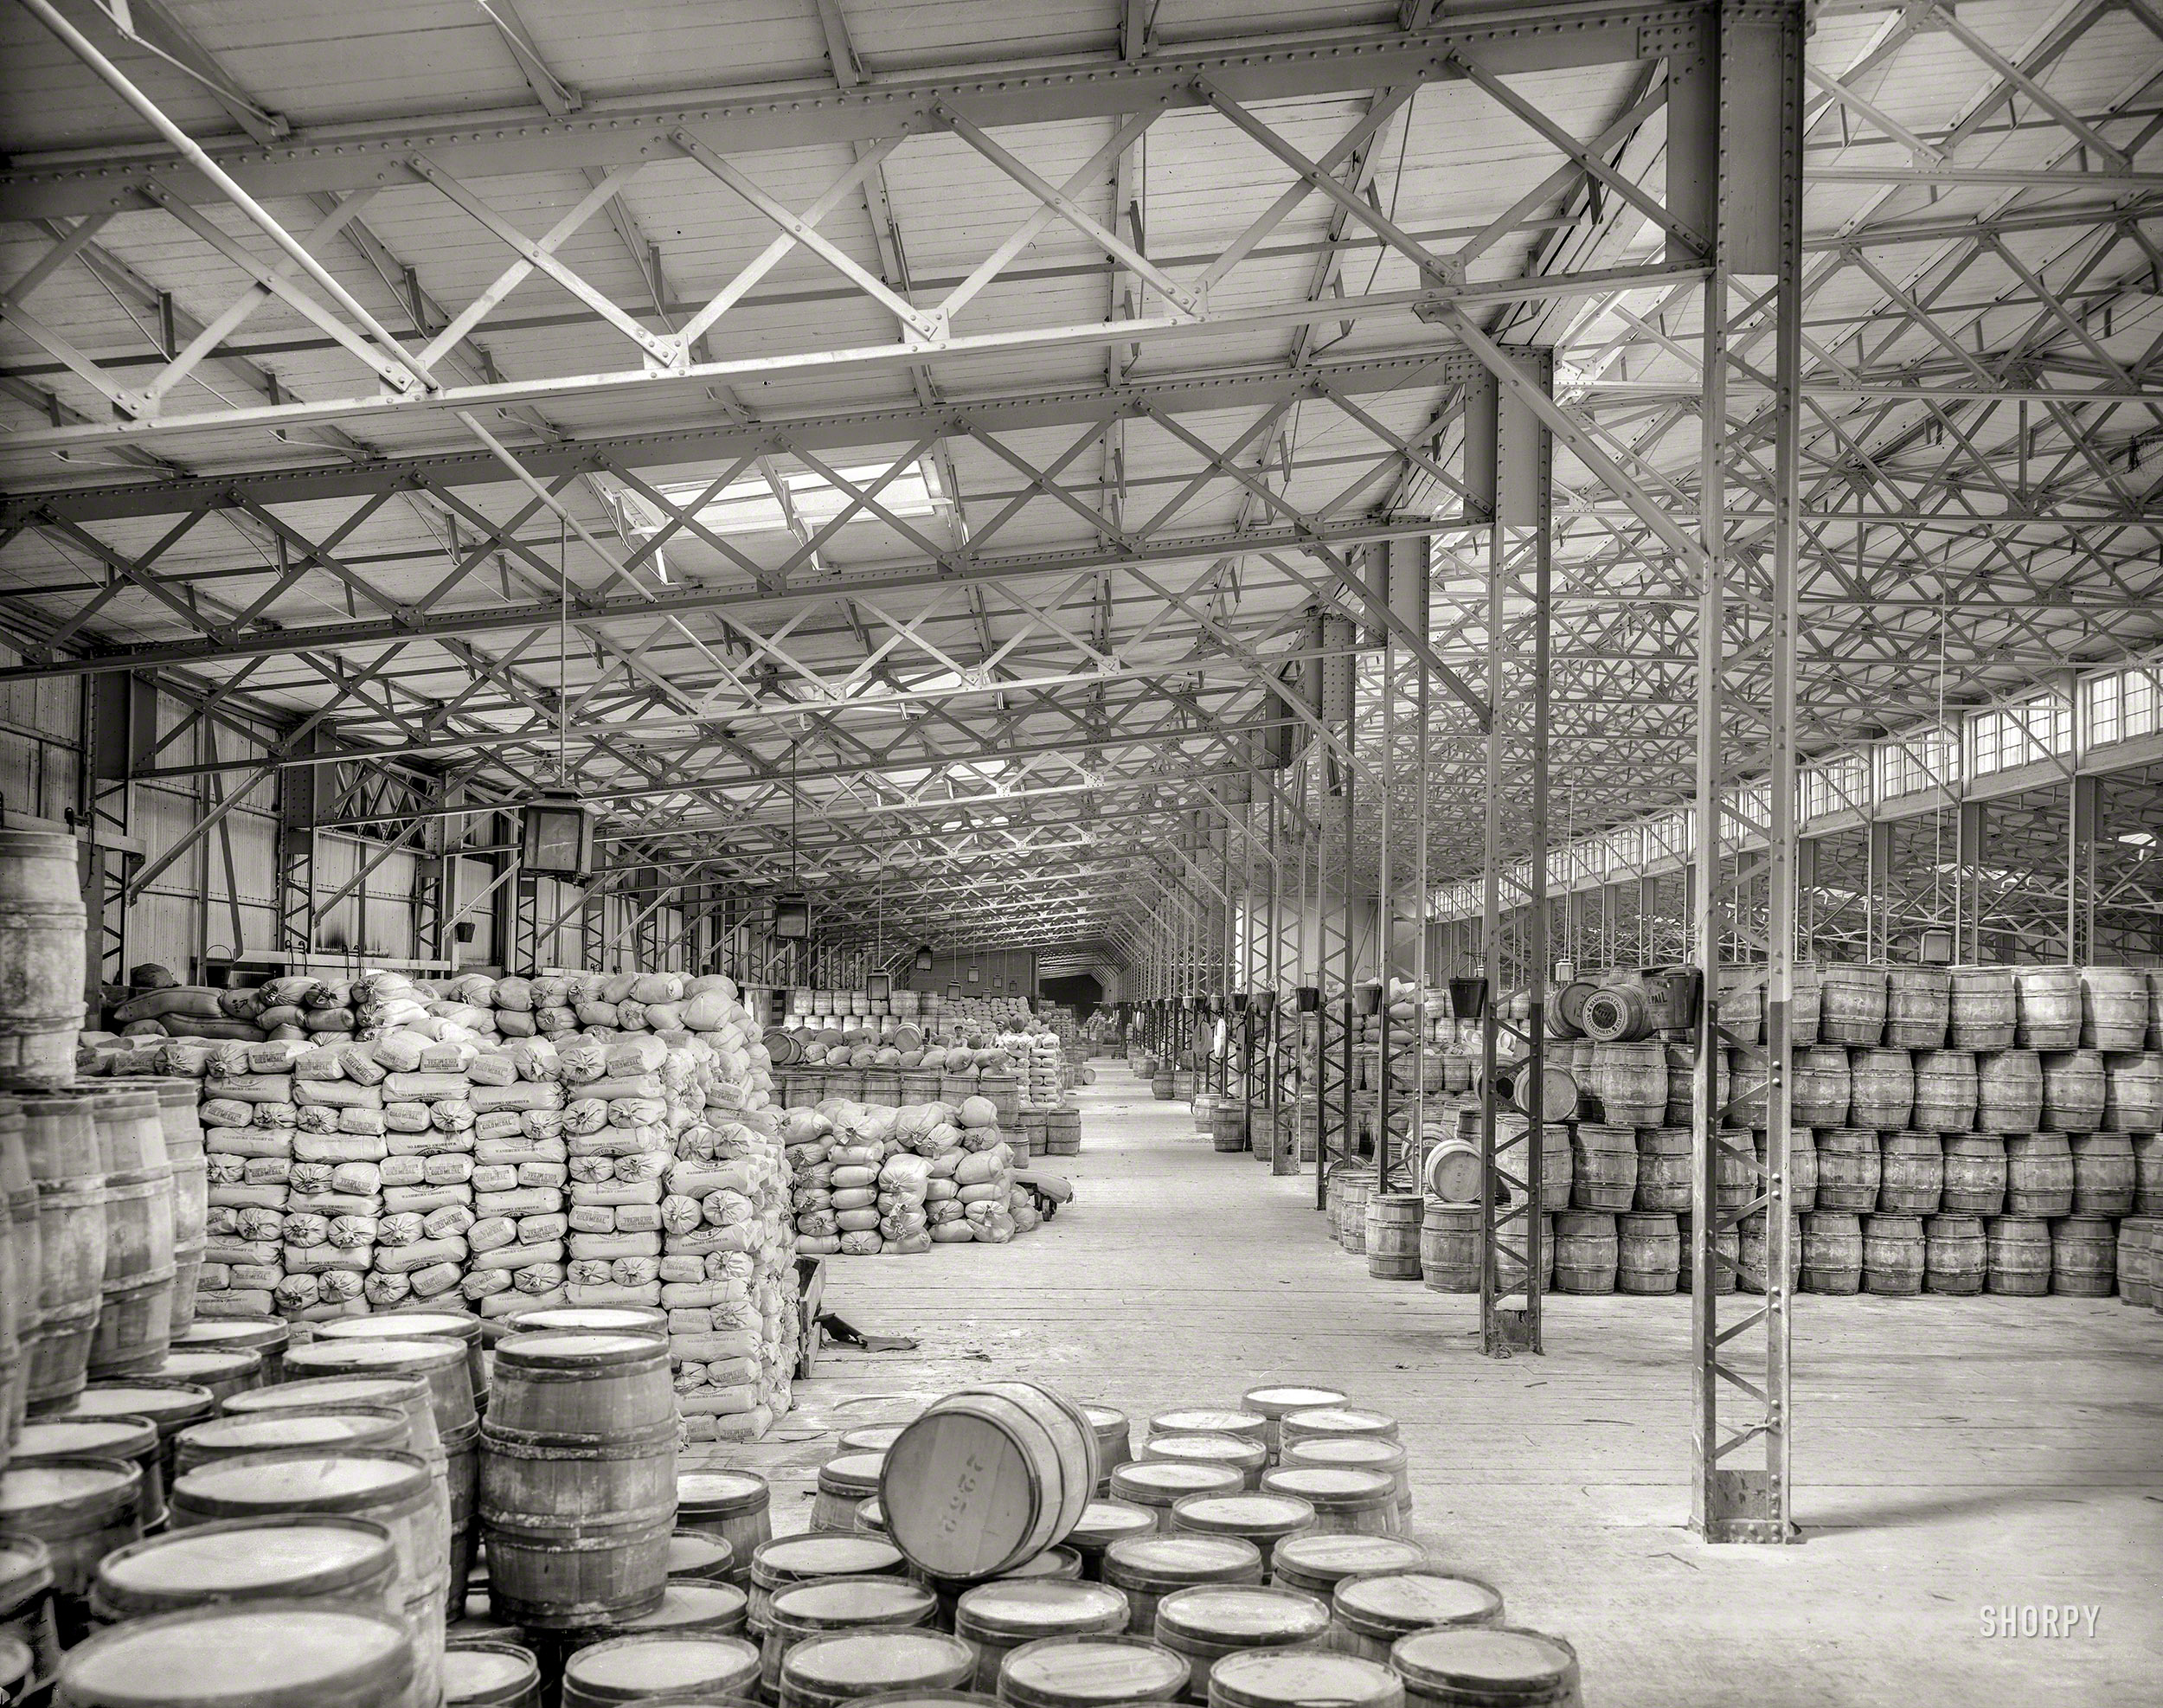 Circa 1900. "New York Central freight sheds, Buffalo, N.Y." 8x10 inch dry plate glass negative, Detroit Photographic Company. View full size.